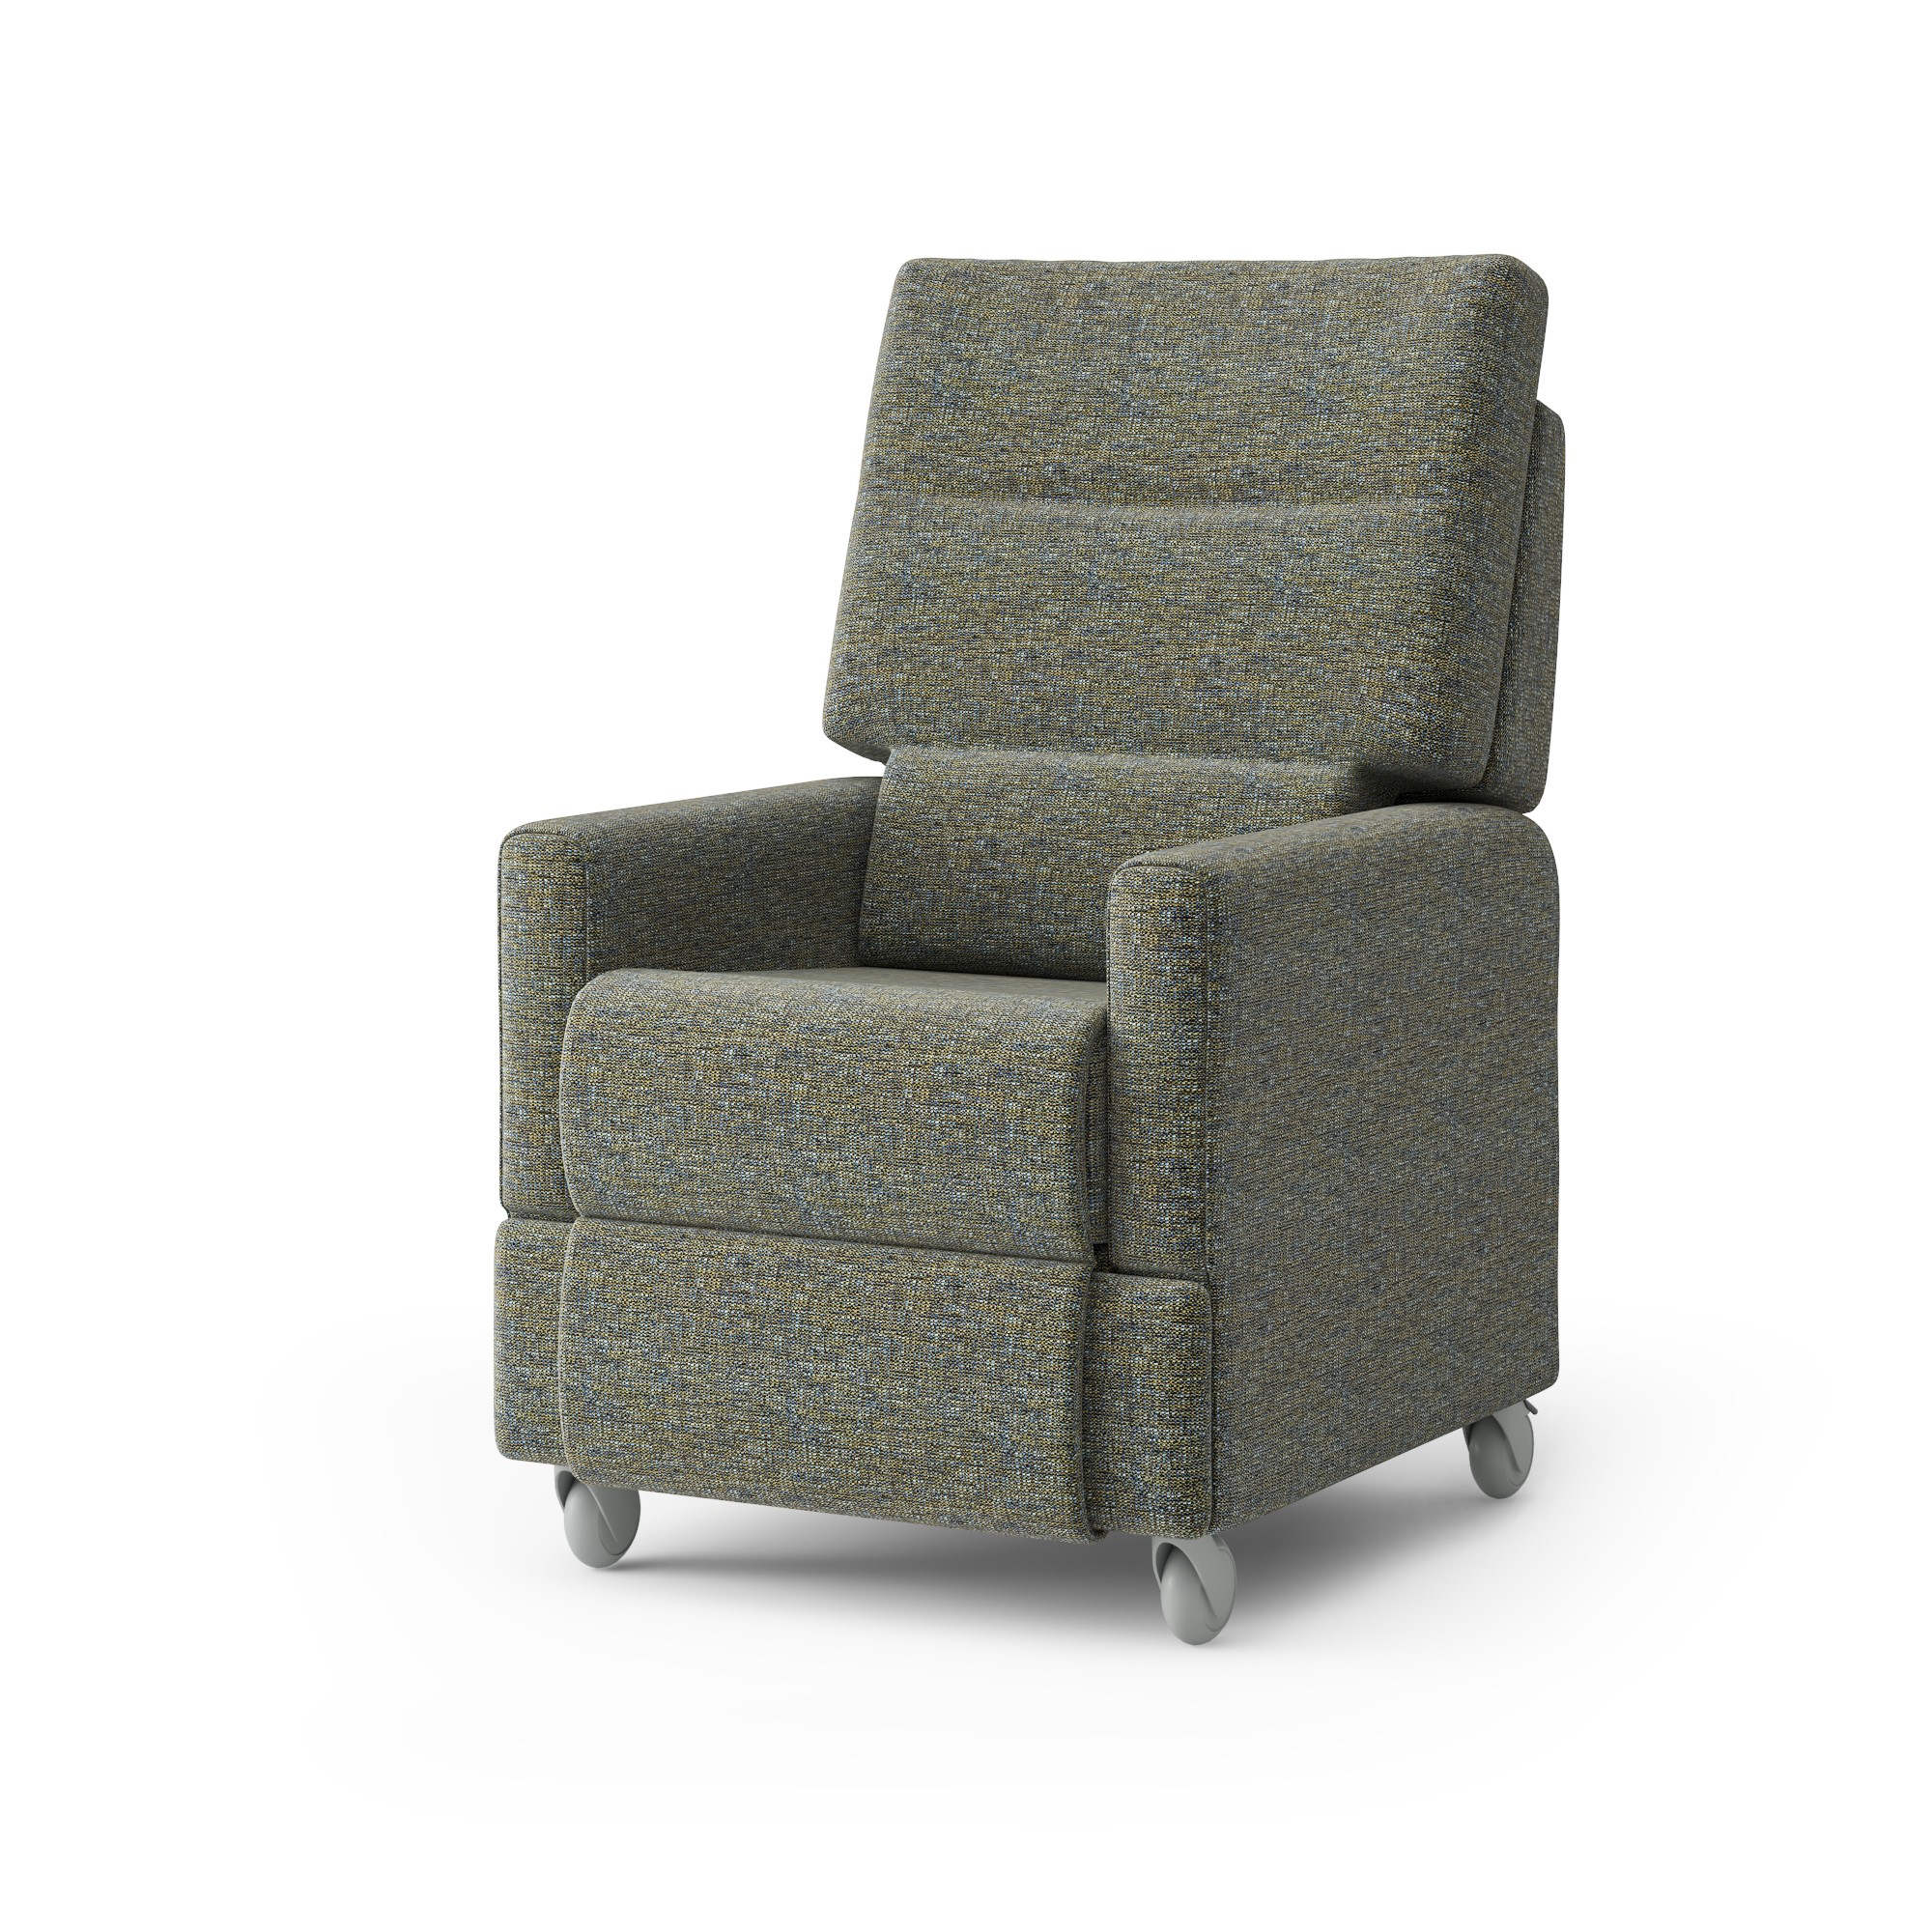 Aged Care Seating Maxwell Recliner